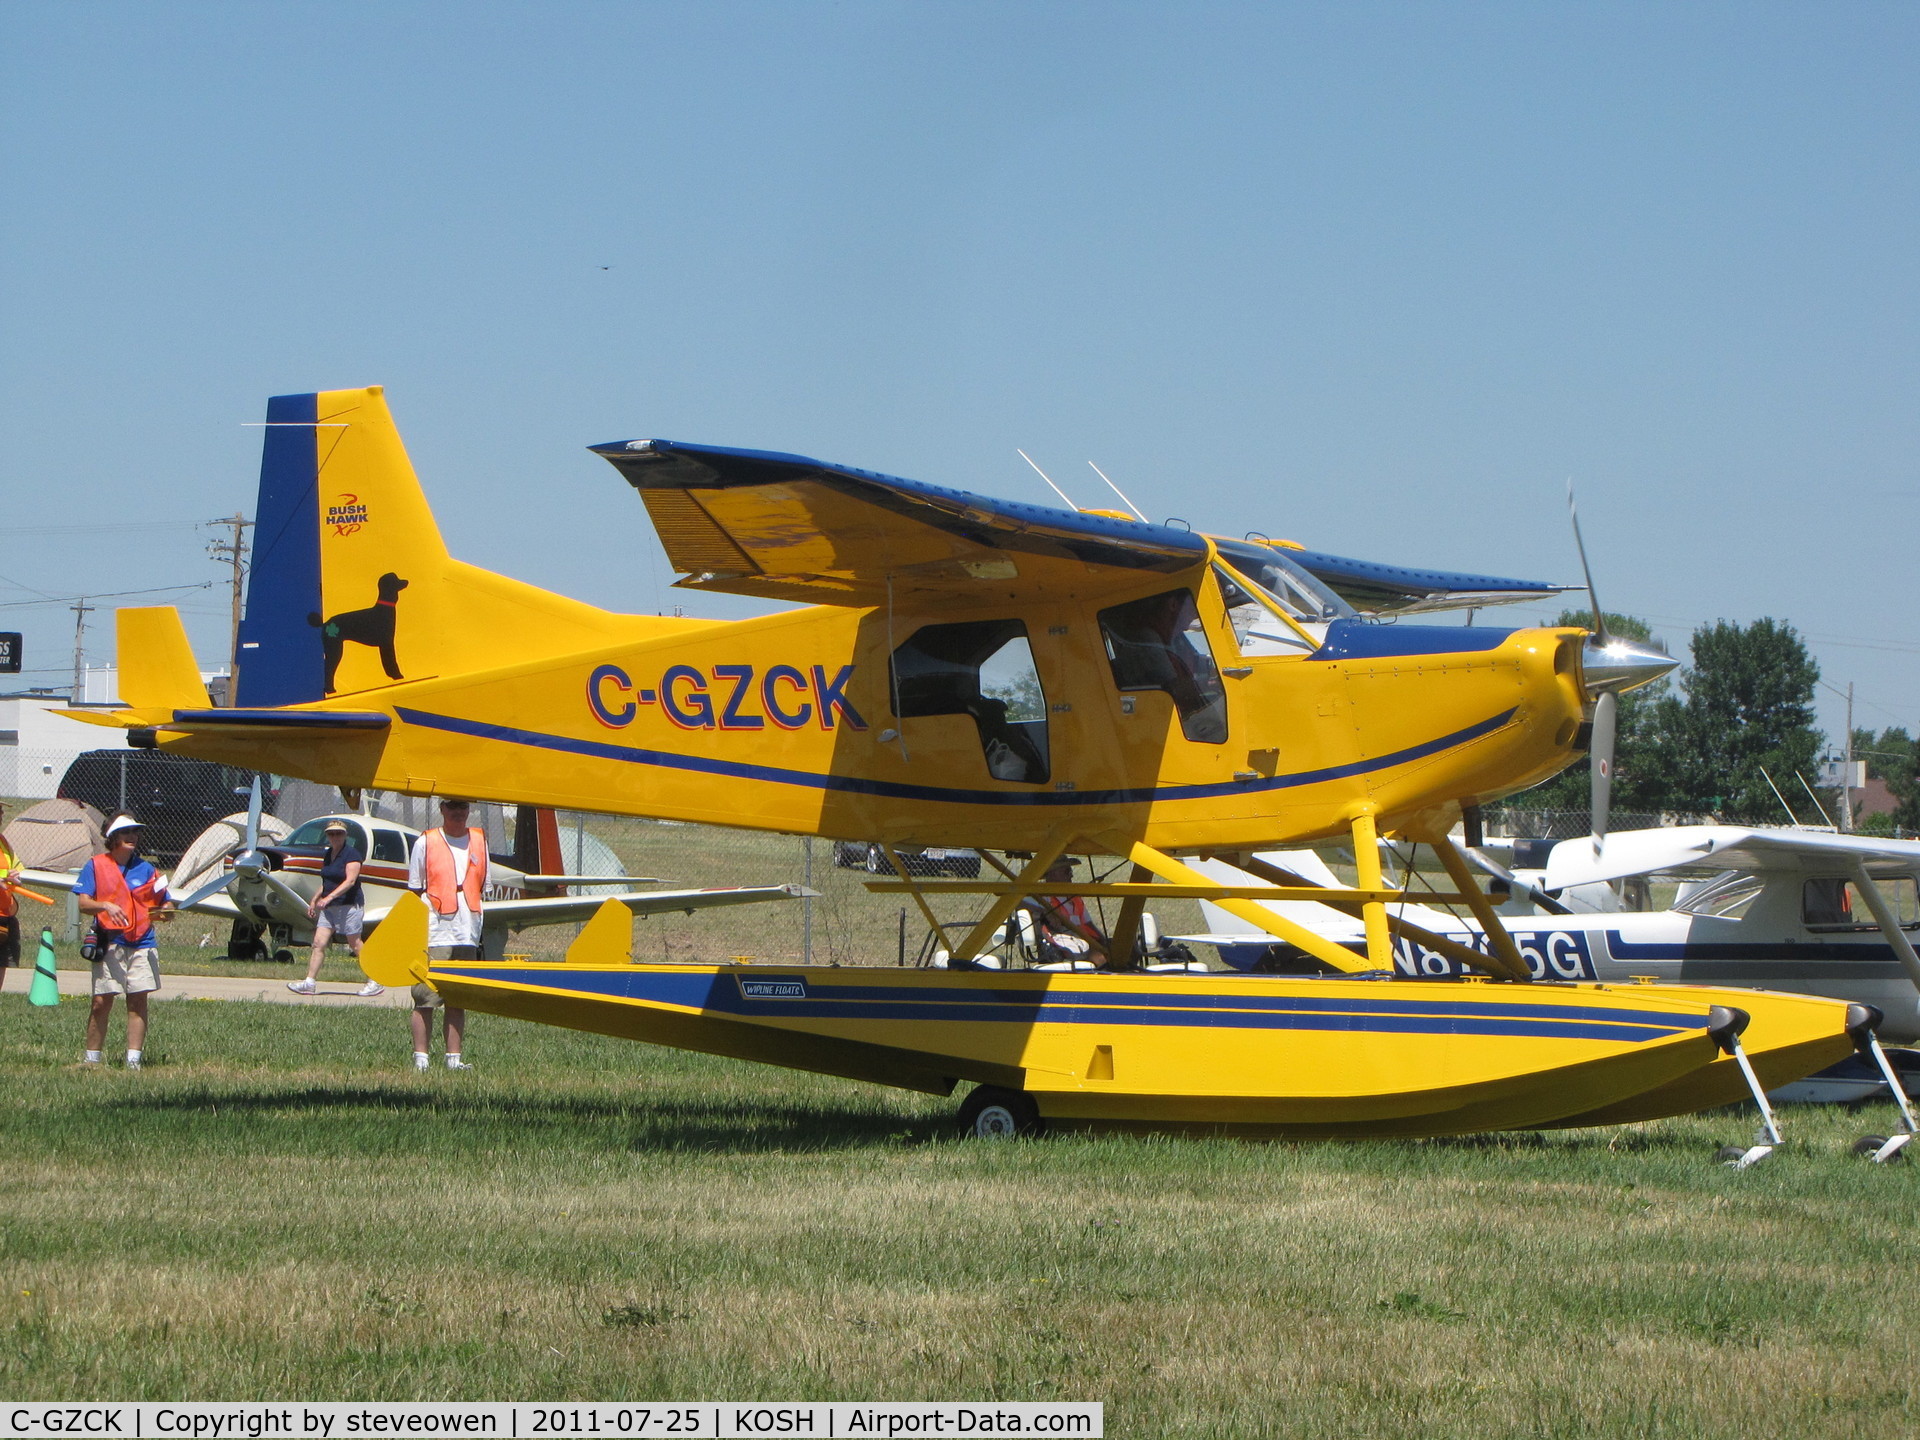 C-GZCK, 2002 Found FBA-2C1 C/N 36, Camped in the N40 GAC camp grounds during EAA2011 @ KOSH